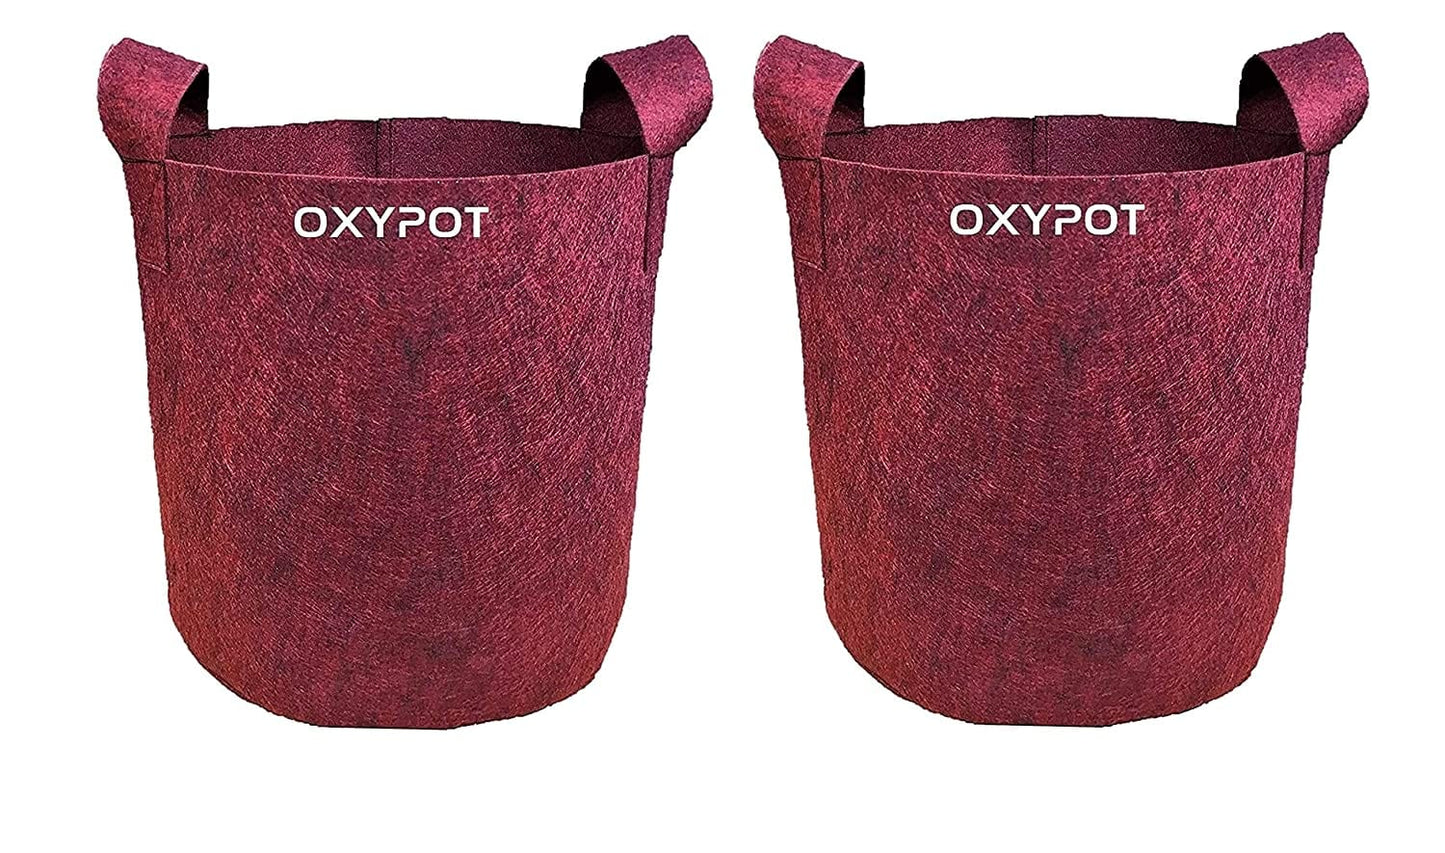 Oxypot Air Pruning Fabric Grow Bags (12 X 12 Inches)